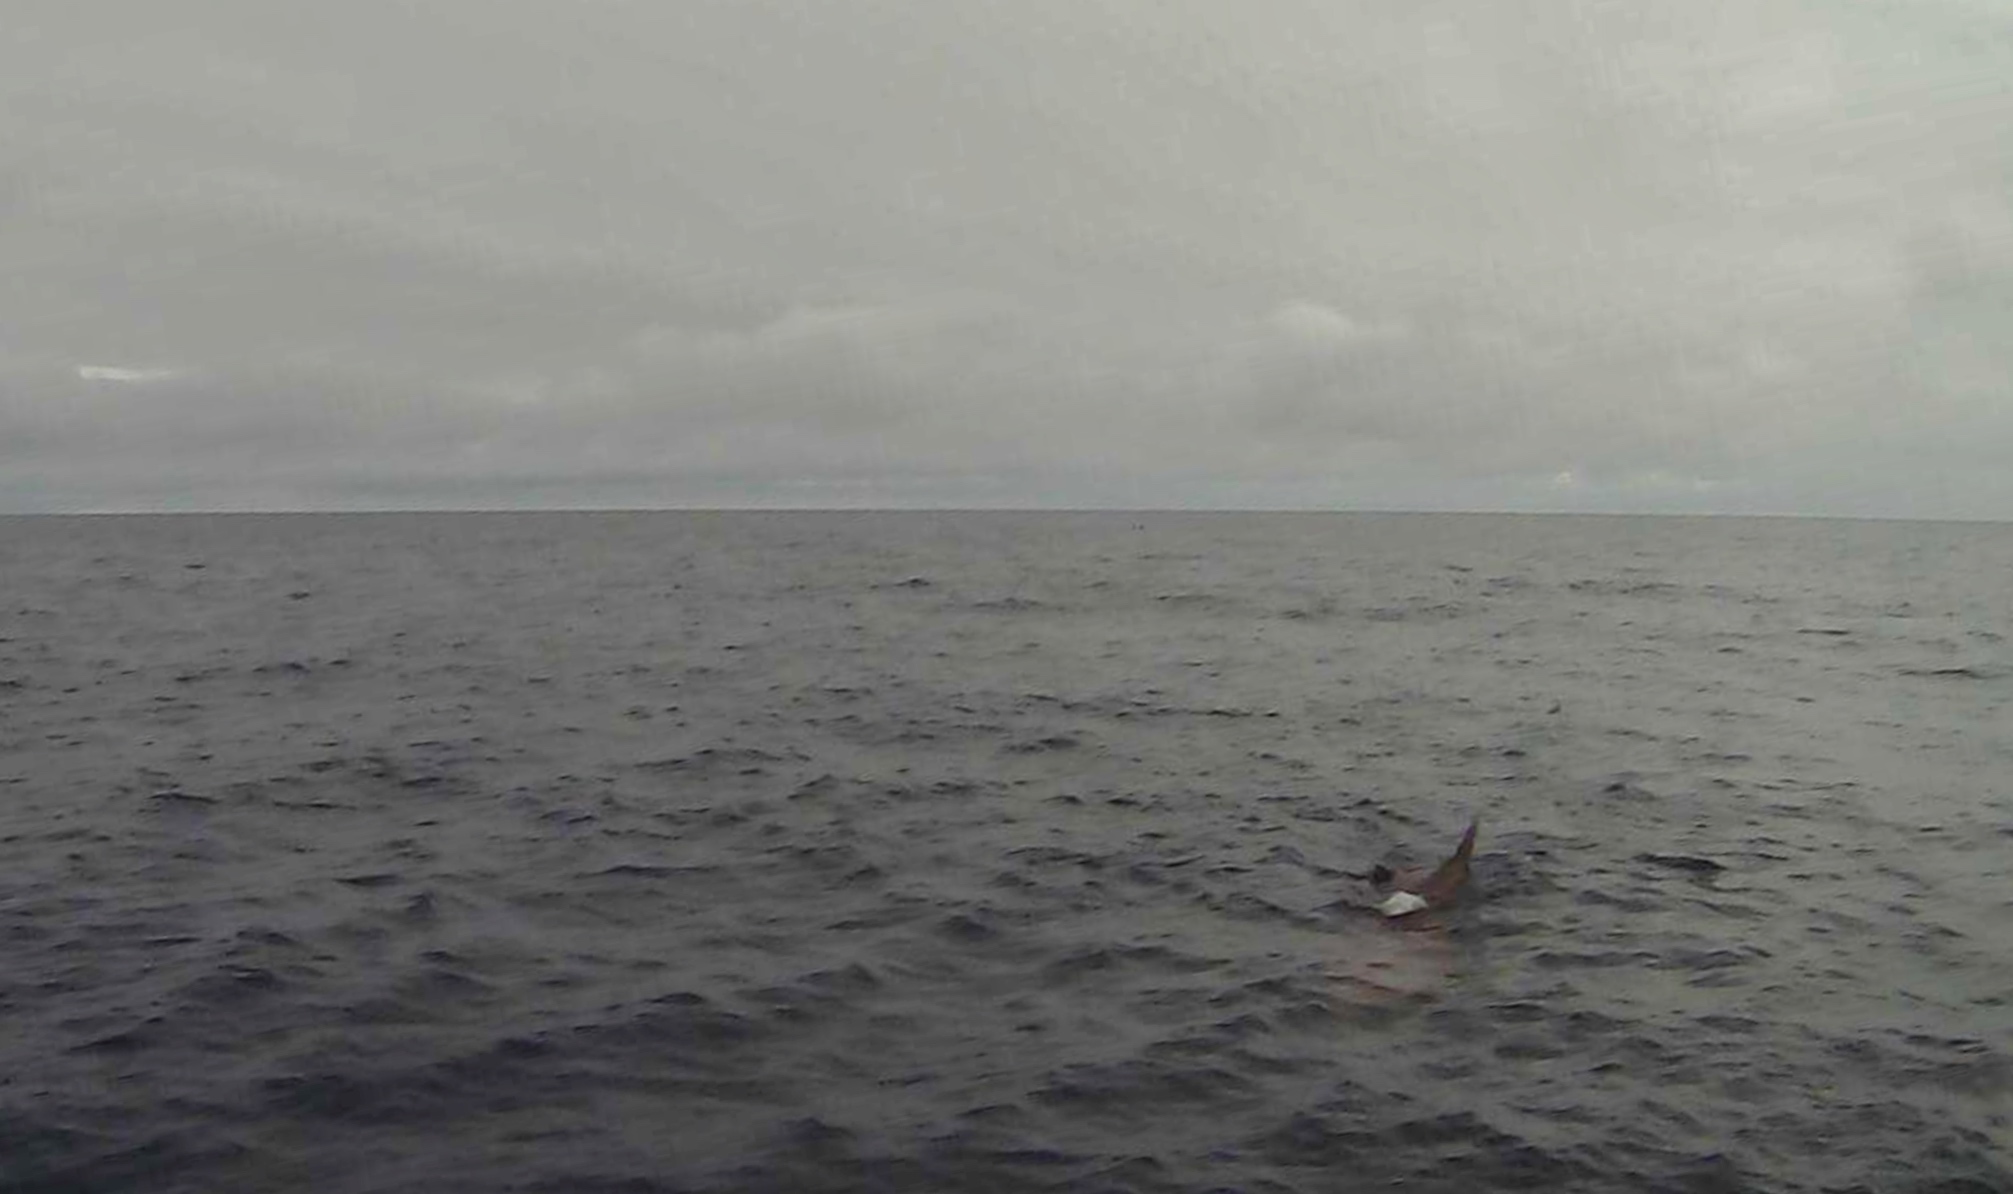 Drone view: A saildrone spots a whale for the first time 